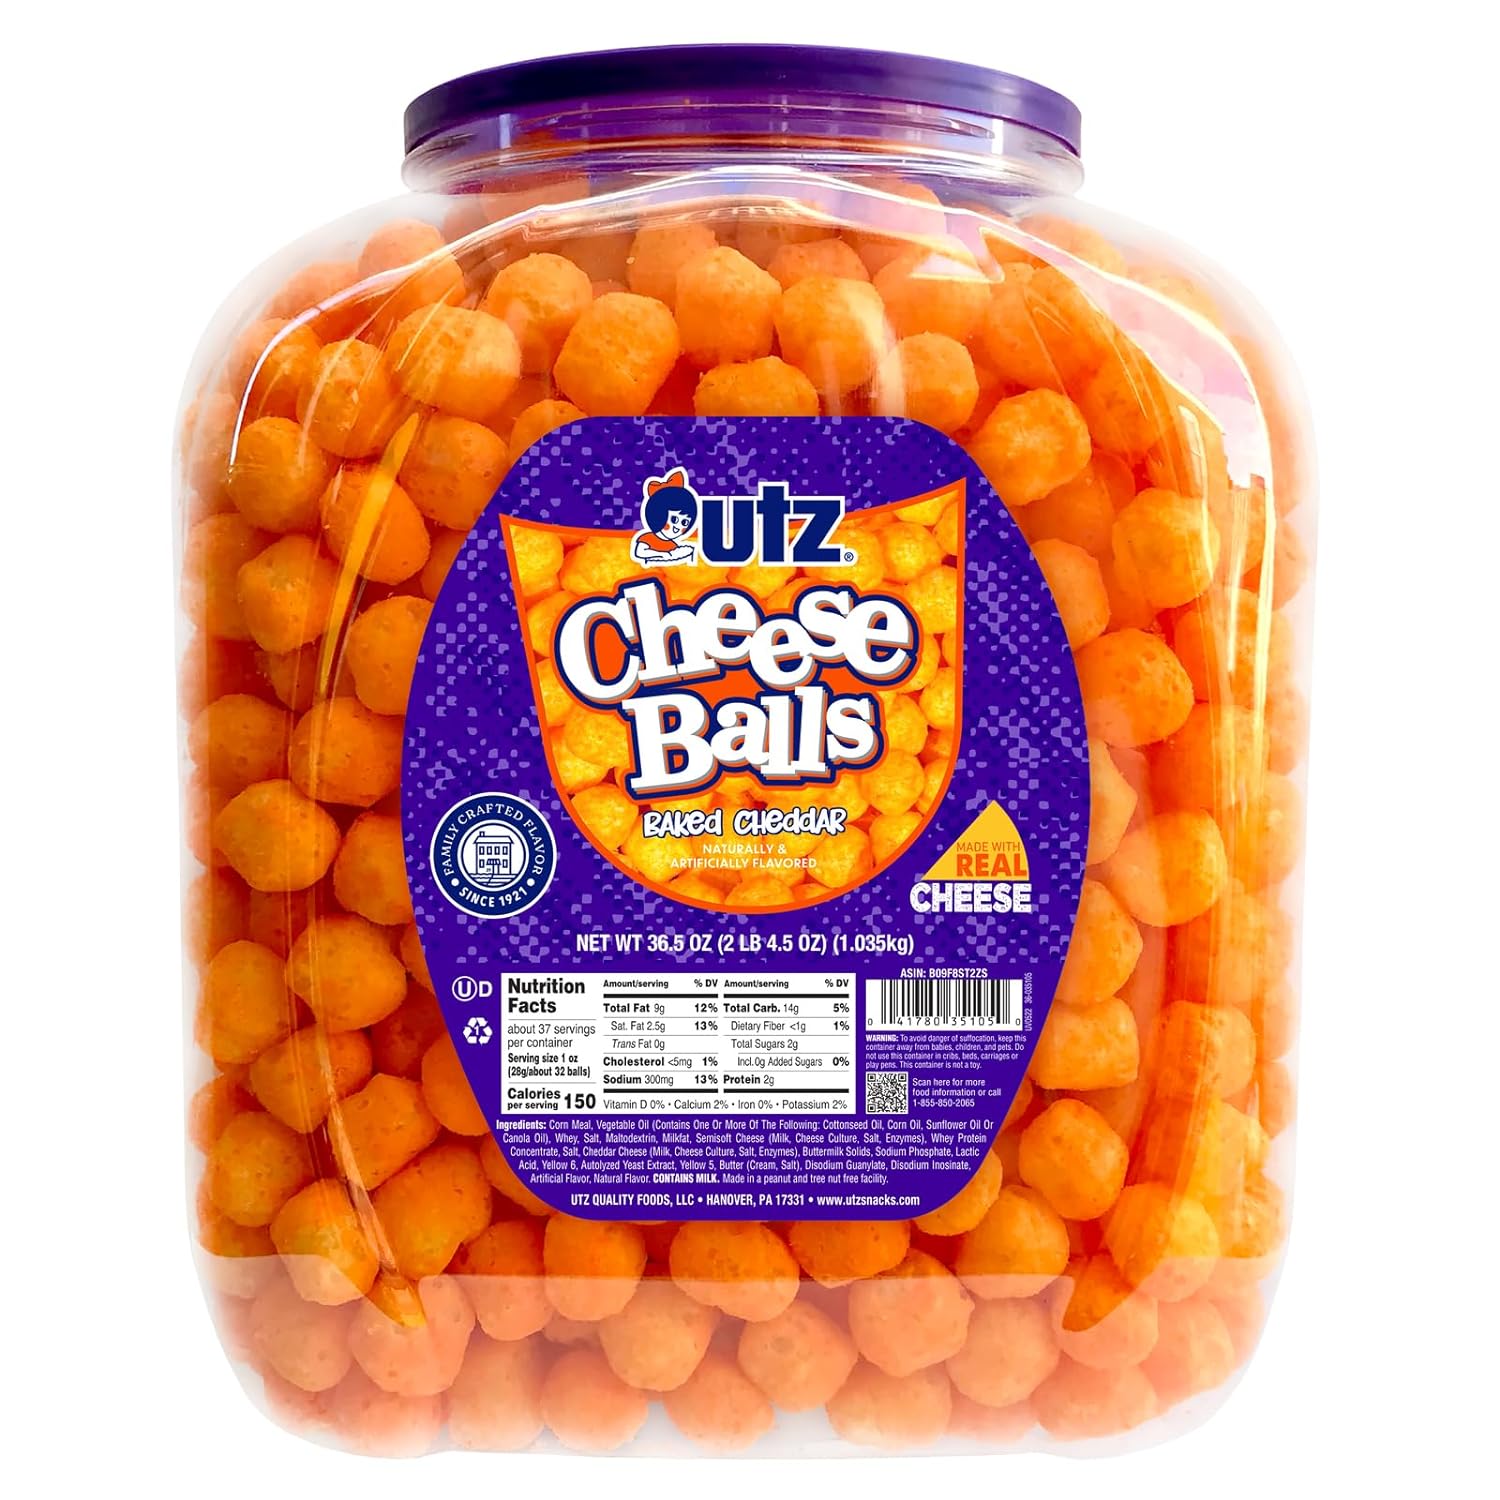 My grandson (5 years old) has been asking me to buy cheese balls. I have bought the Planters brand in the past, but not thrilled with them. I ordered the Utz container to see how they were. I am VERY satisfied with the product. Great taste!! Great value!! My grandson is going to freak when he sees how big the container is. Another review said the container did not have a protective seal, but mine came with a band of plastic around the lid.